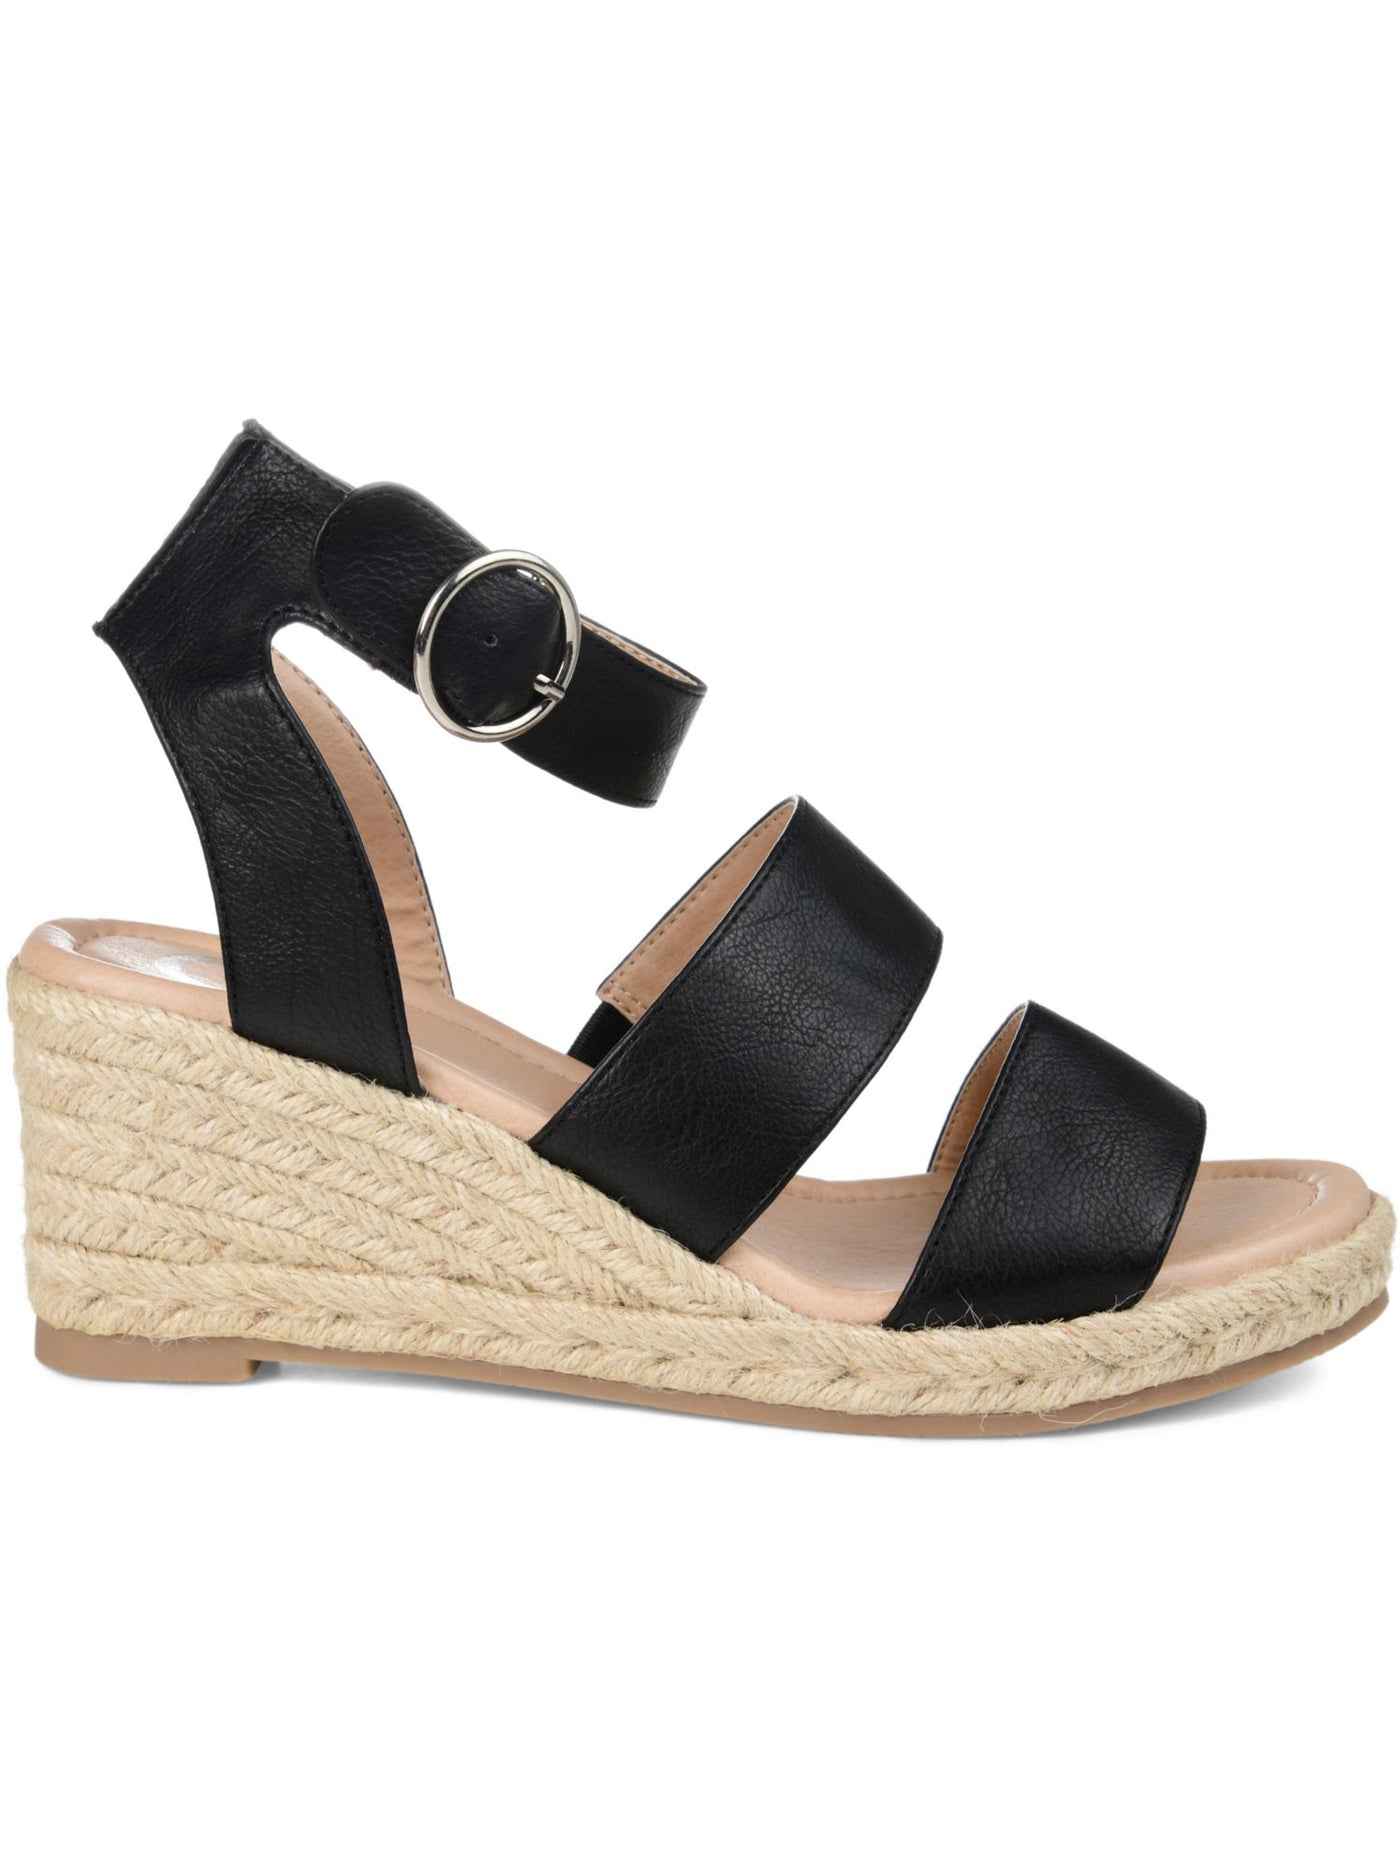 JOURNEE COLLECTION Womens Black Cushioned Nora Open Toe Wedge Buckle Espadrille Shoes 9